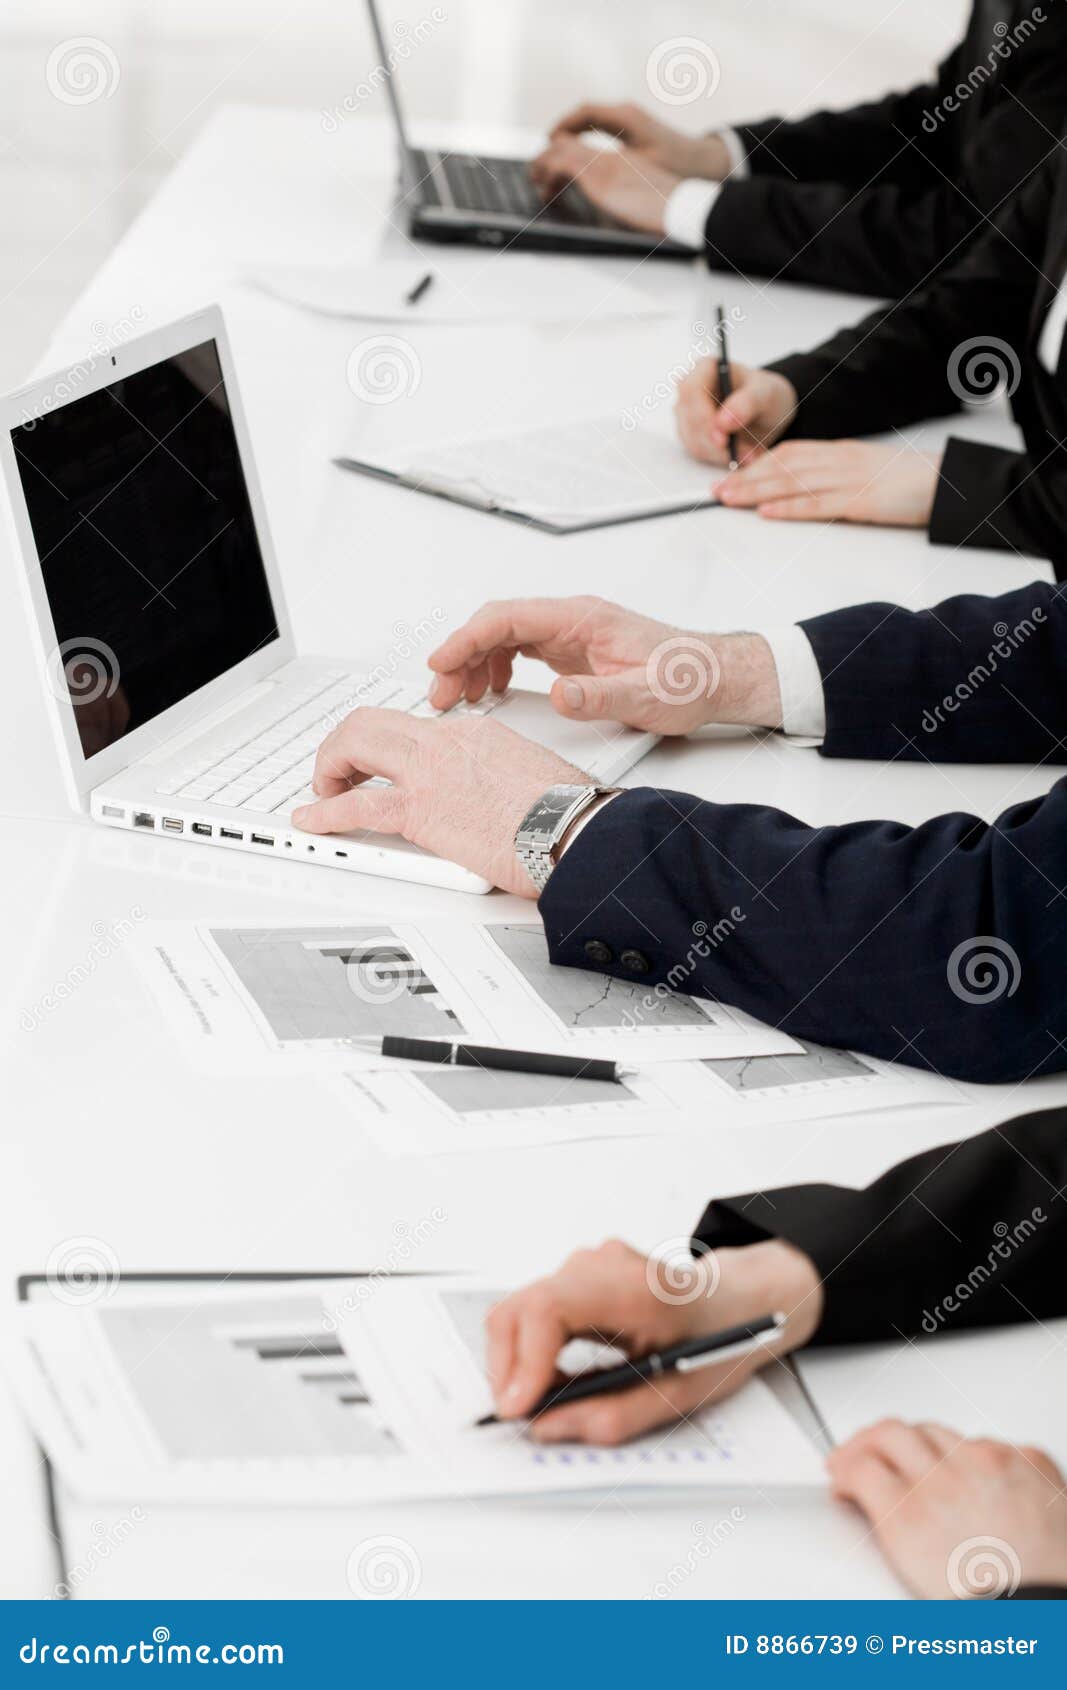 At briefing stock image. Image of focus, improvement, executive - 8866739